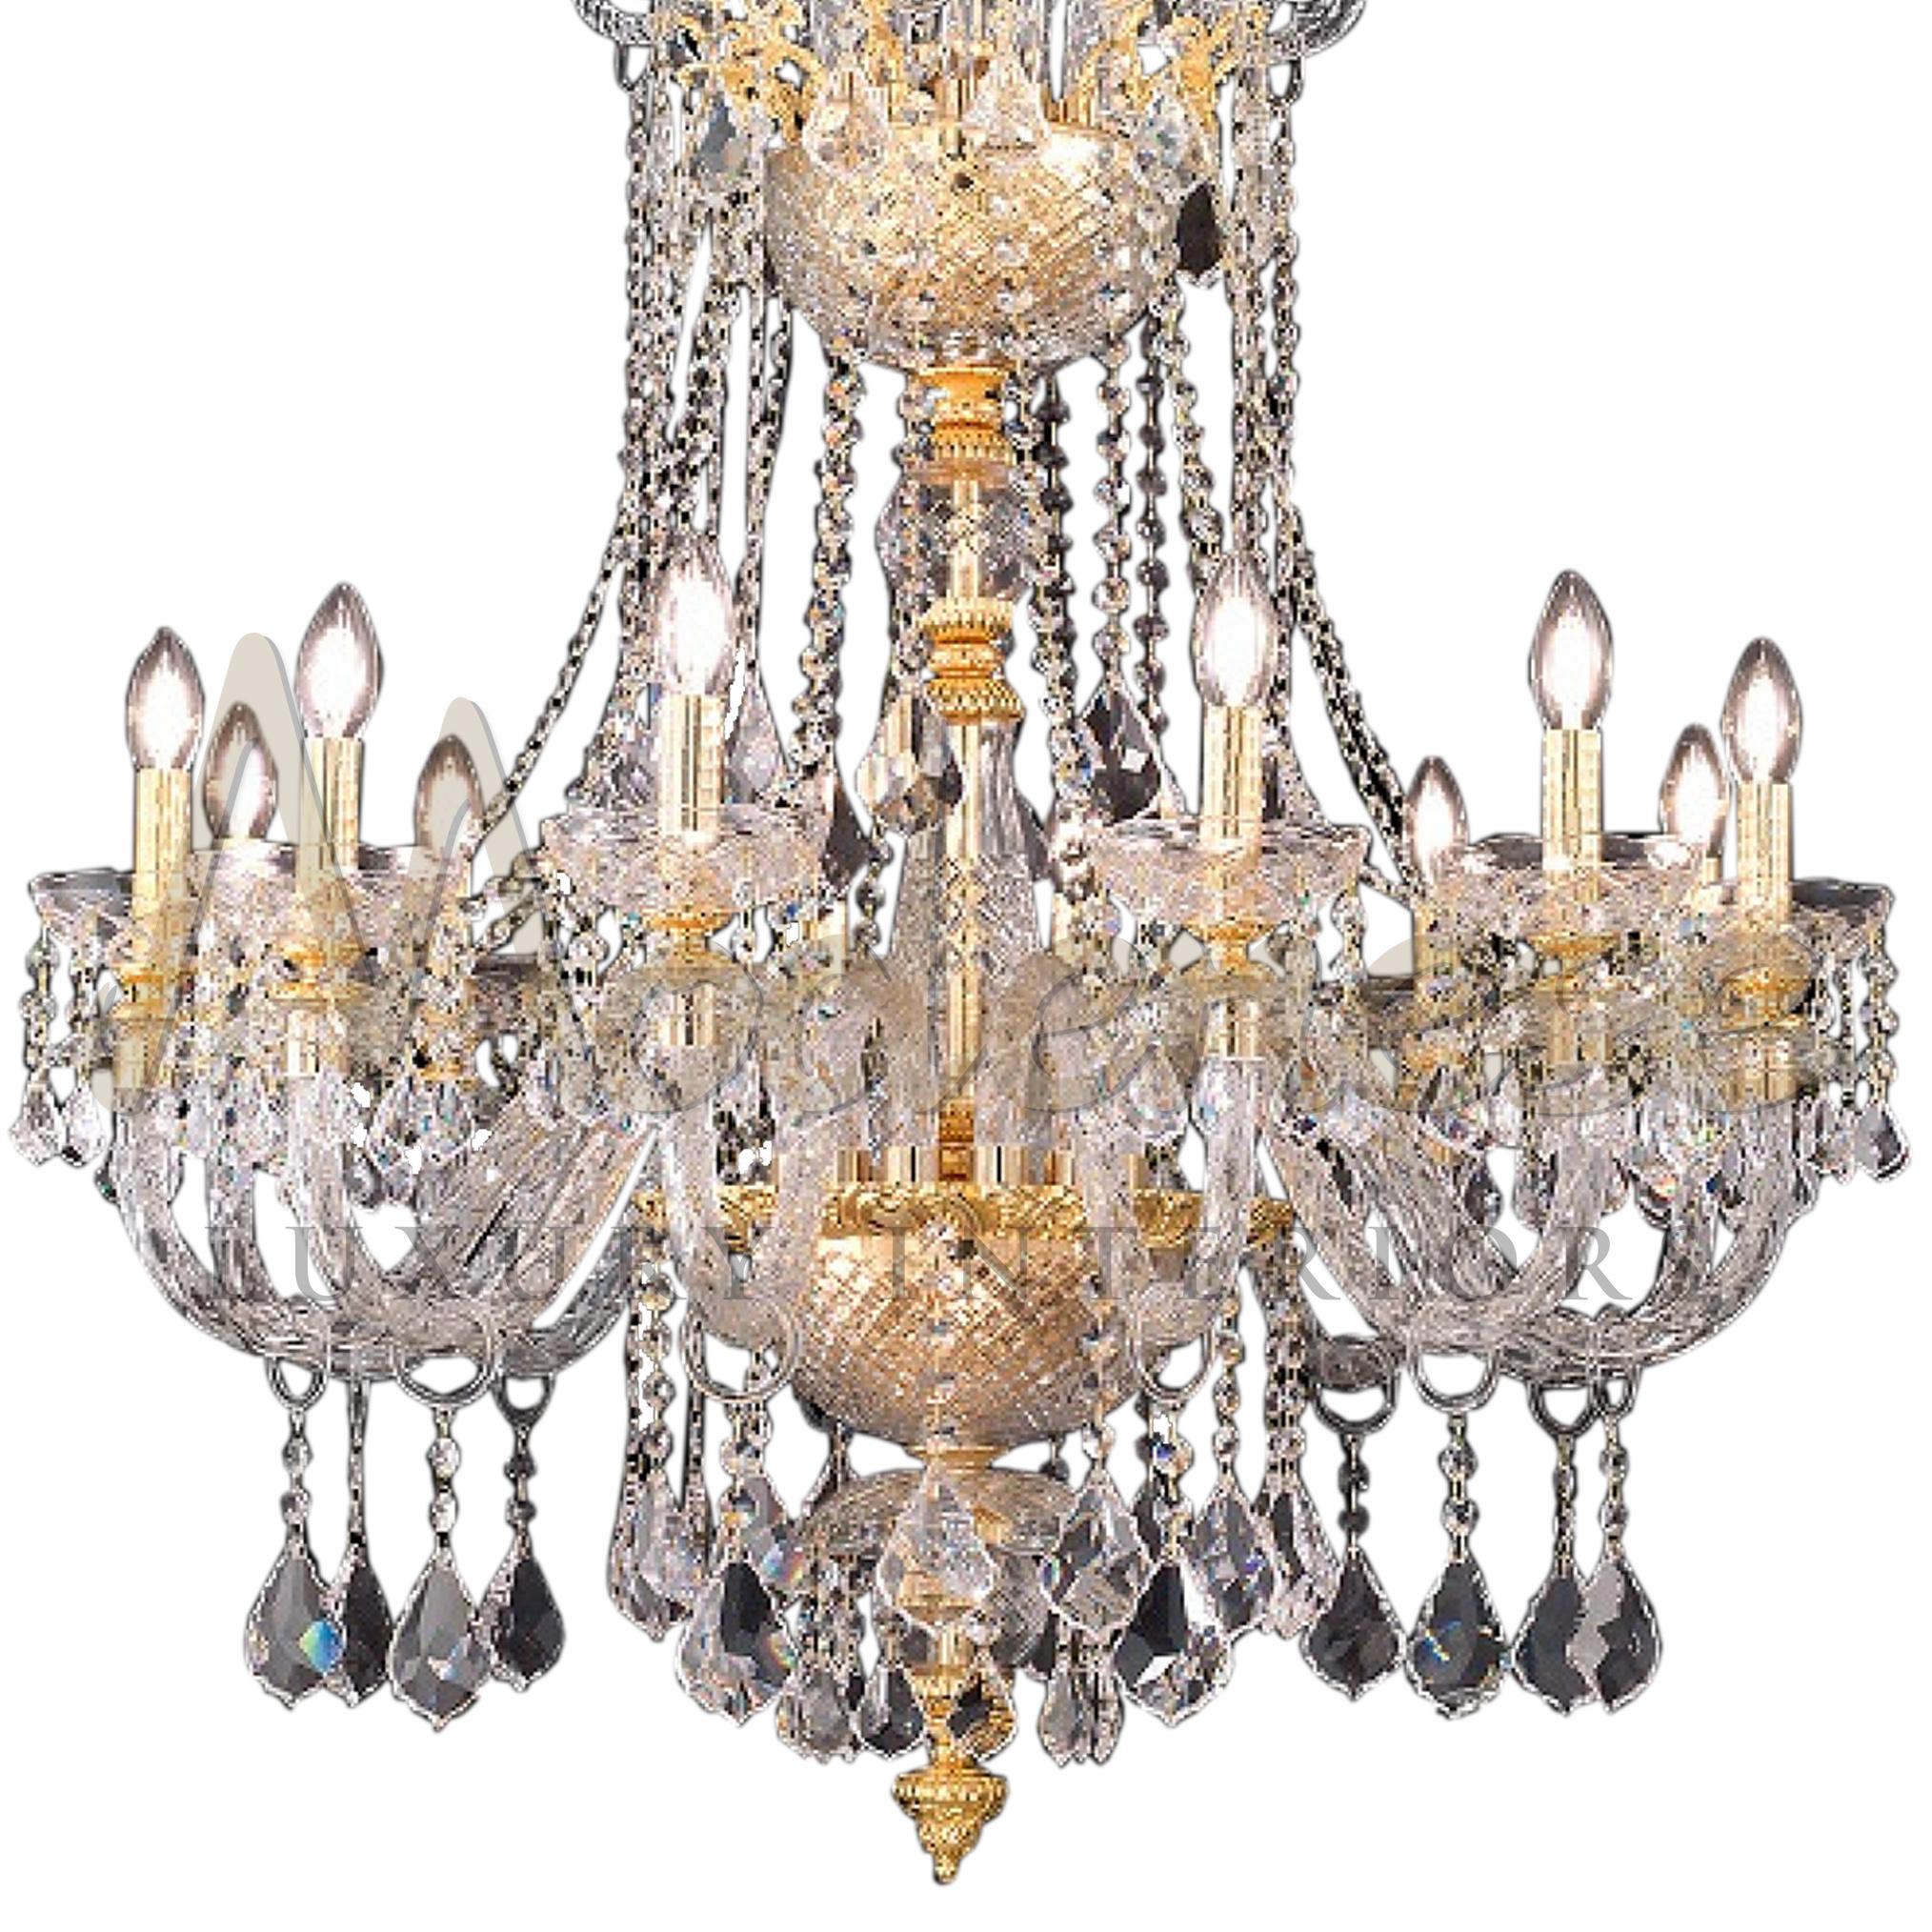 Eternal and beautiful brass bases, elegant Italian 12-lights chandelier with sparkling luxury decorative elements made of Scholer crystals and gold finishing will become a royal decoration to any interior, whether it is a restaurant, hotel, country